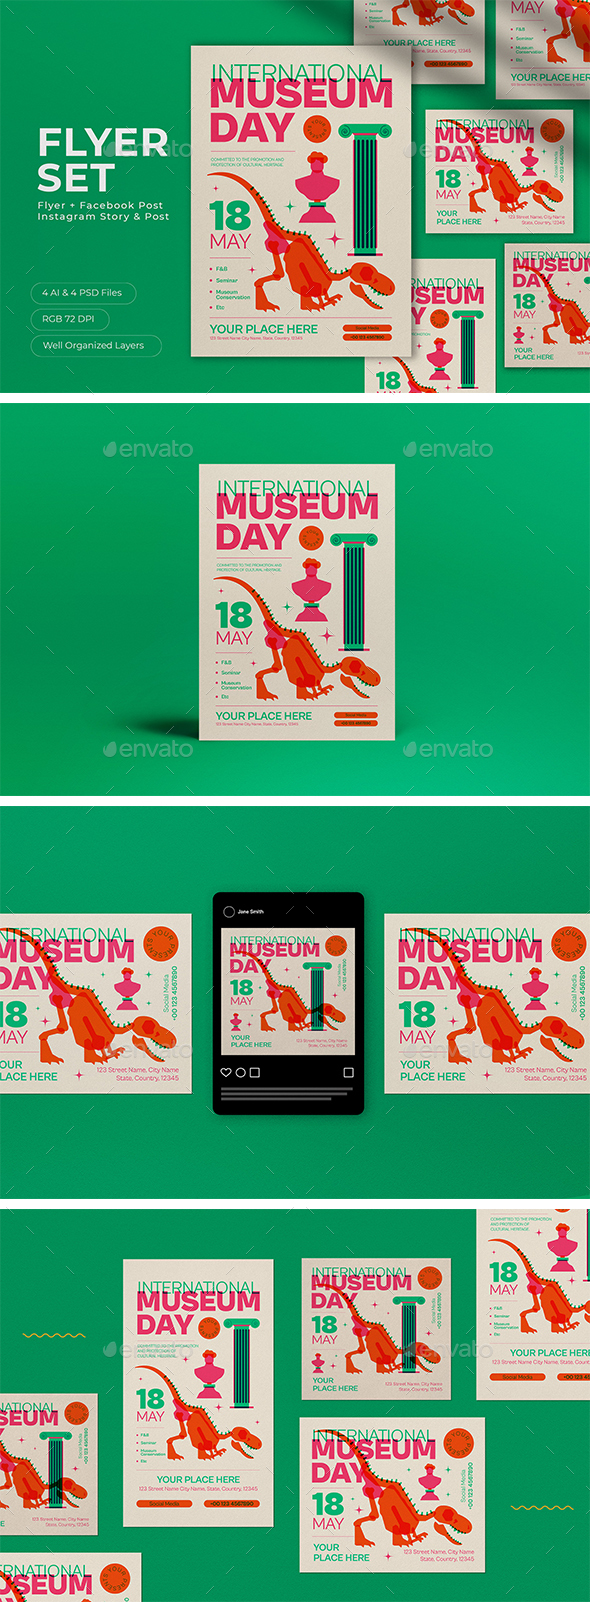 [DOWNLOAD]White Risograph International Museum Day Flyer Set